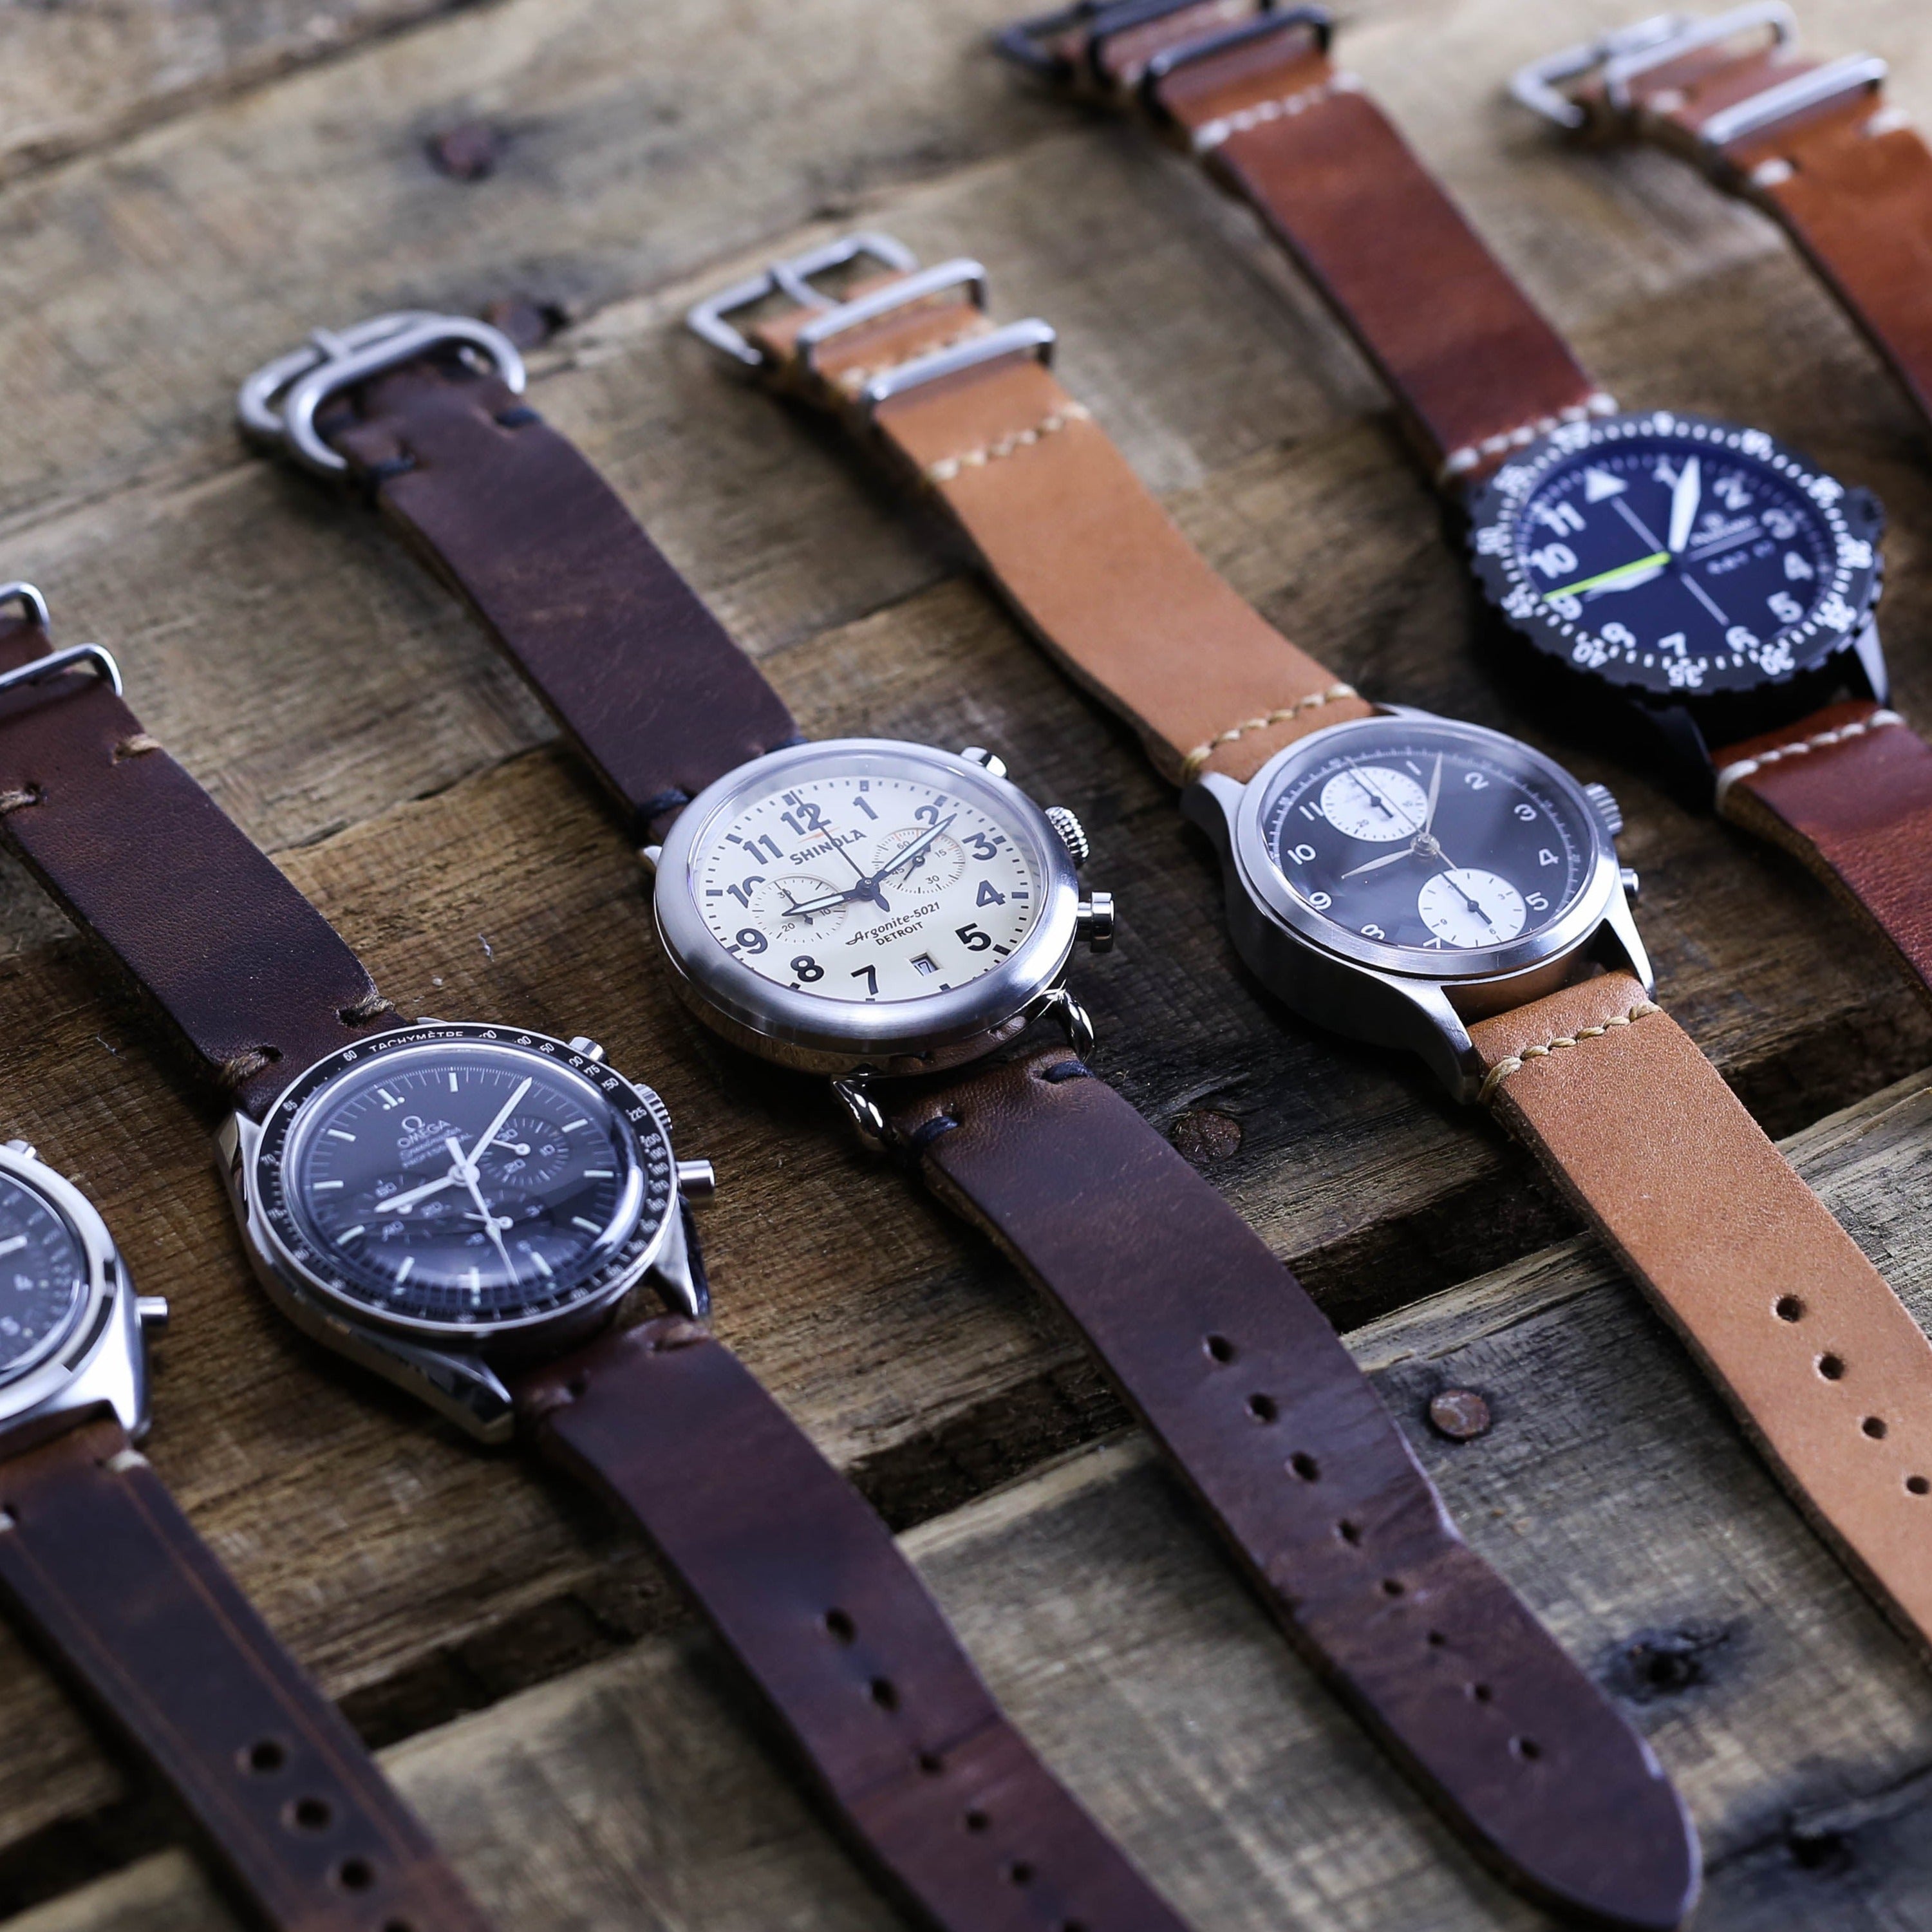 4-Piece Leather Punch Set: Create Custom Watch Straps & Belts With Ease!